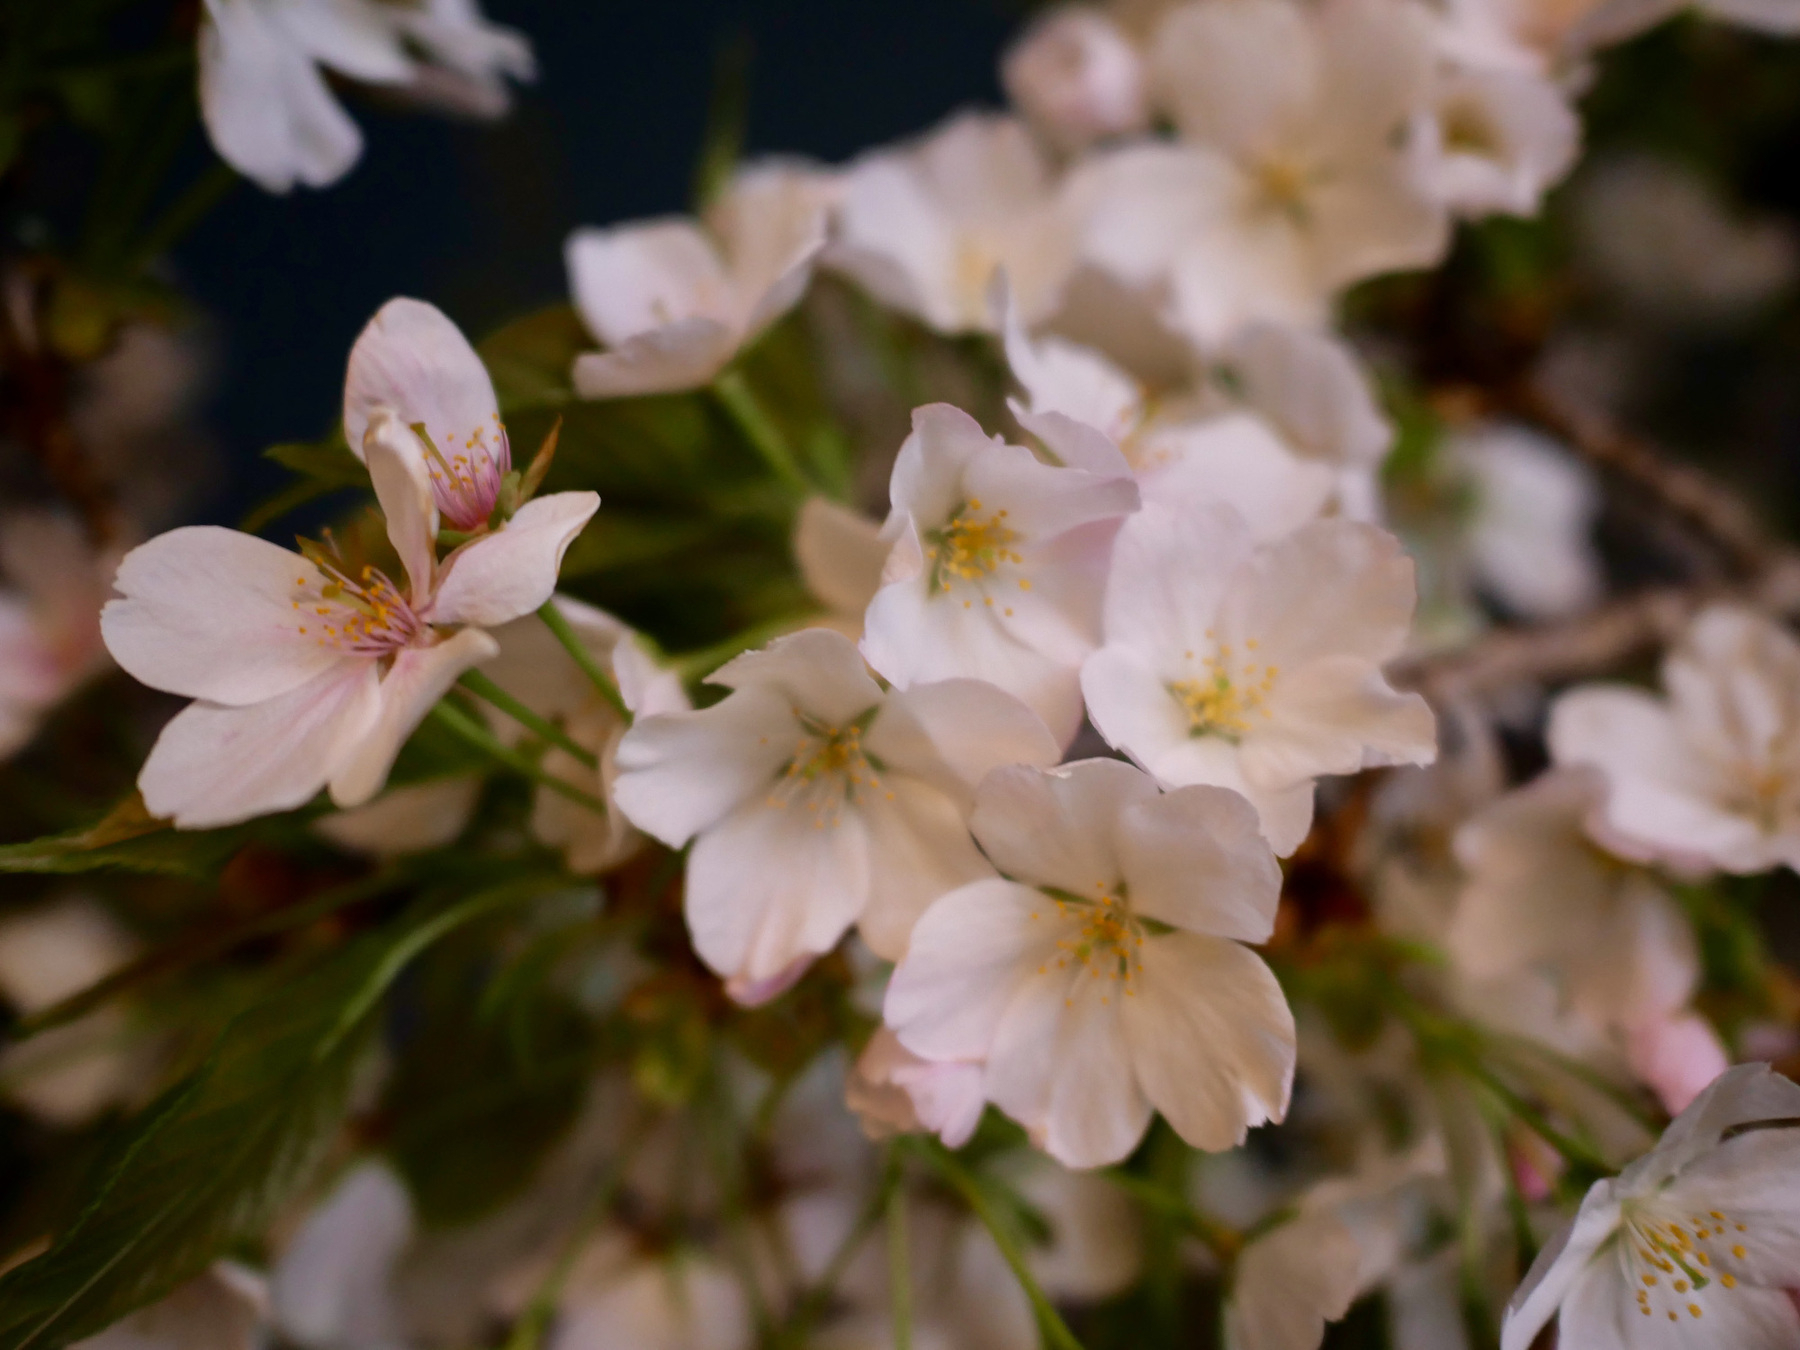 closeup of some cherry blossoms in the dark, lit up by a nearby takoyaki stall